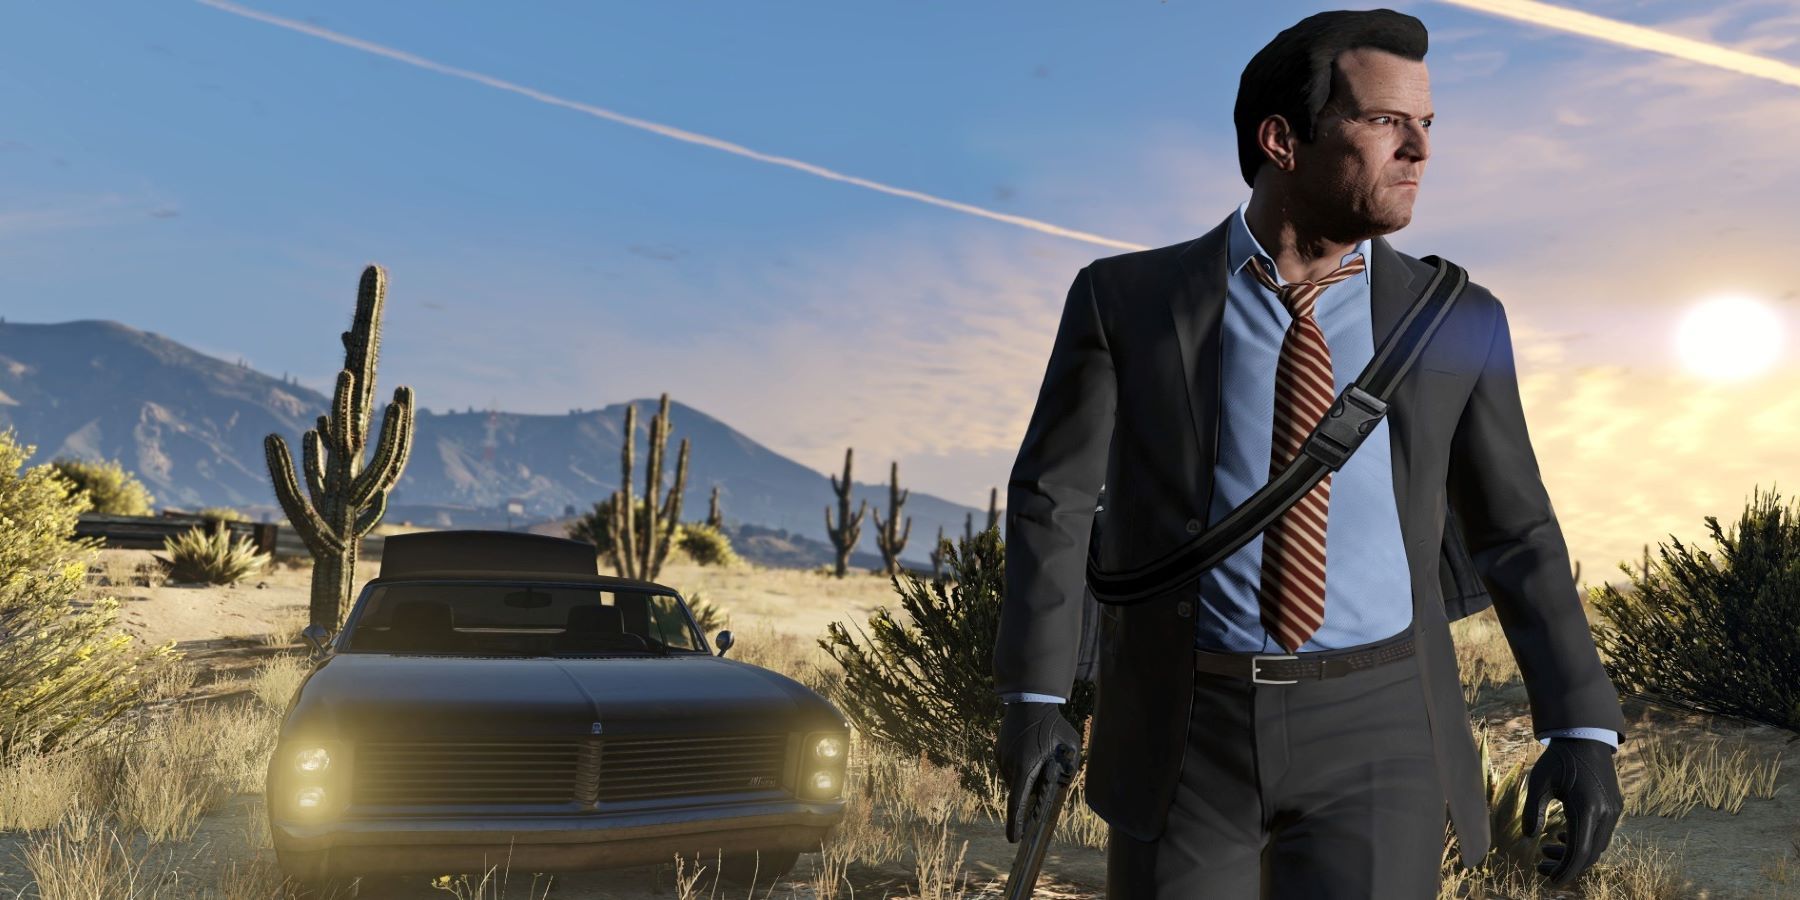 Michael de Santa from Grand Theft Auto 5 standing in front of a car in the desert